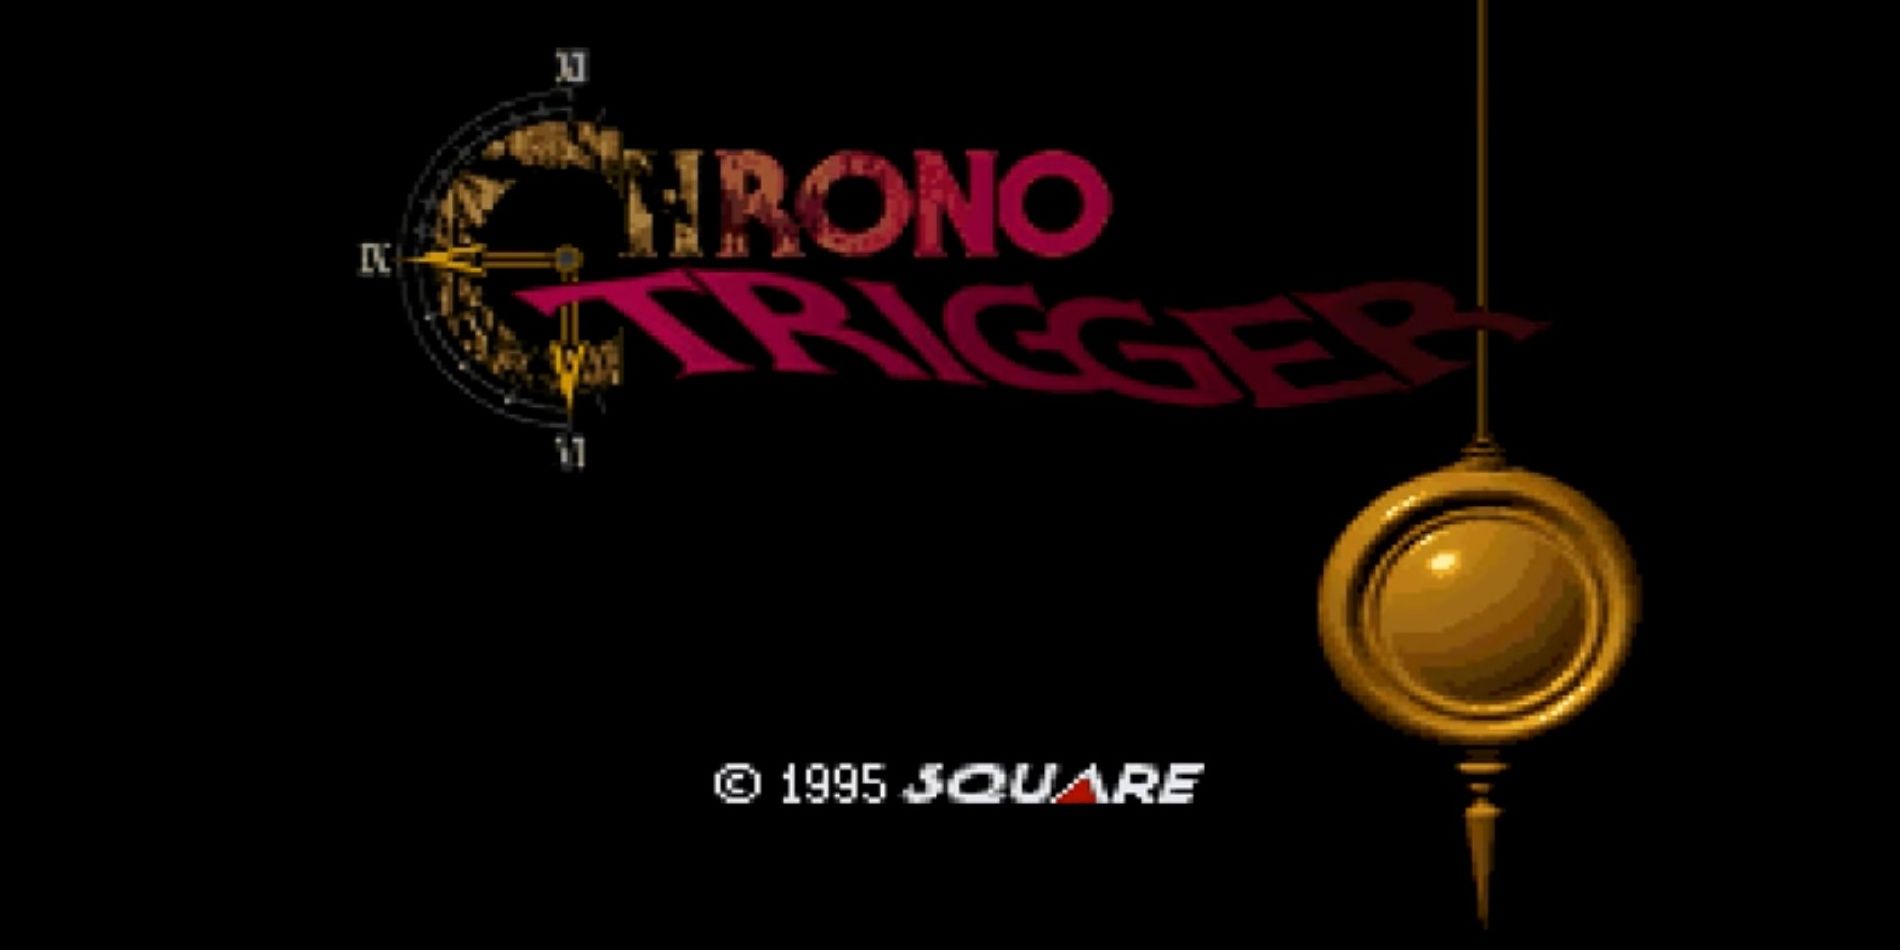 A screenshot of the Chrono Trigger title screen, showing the pendulum and title.